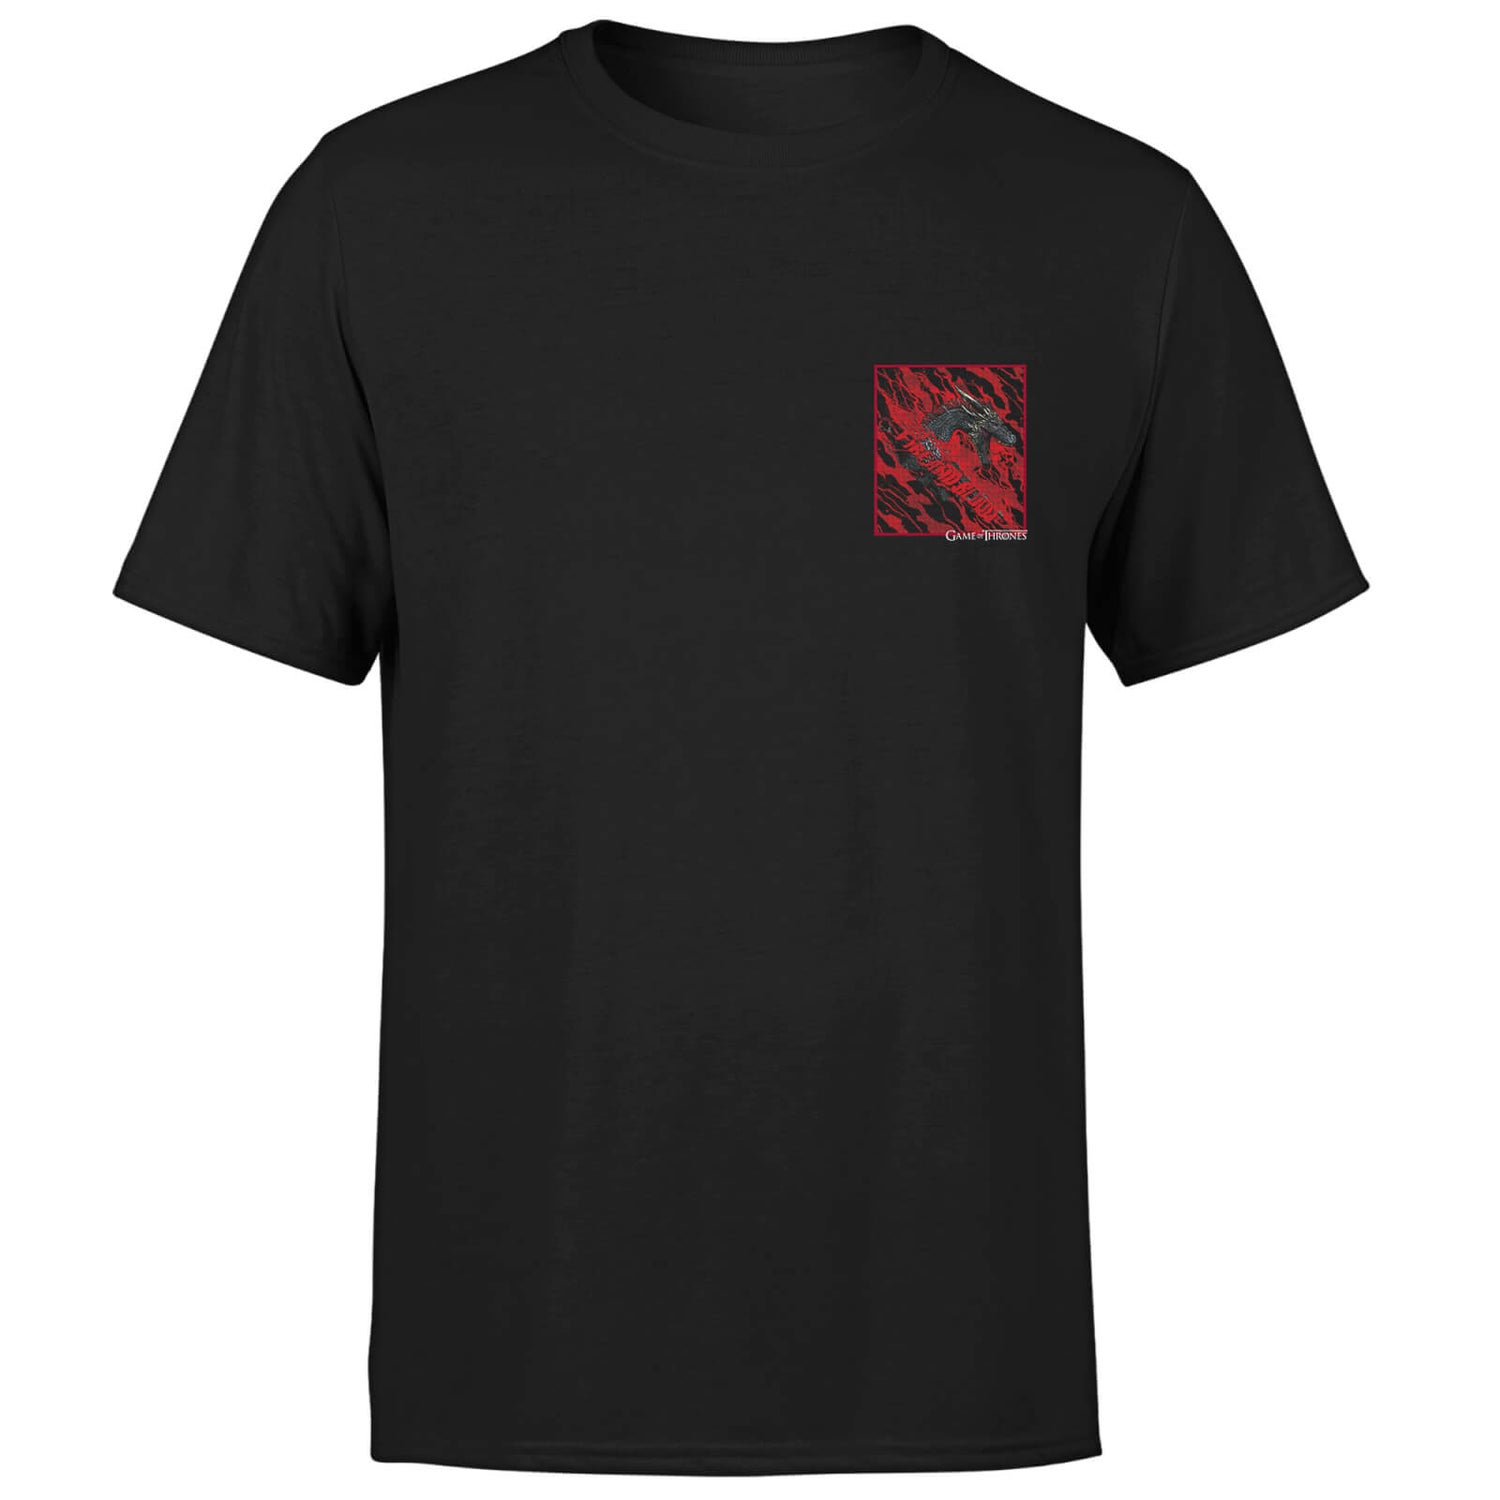 Game of Thrones Fire And Blood Men's T-Shirt - Black